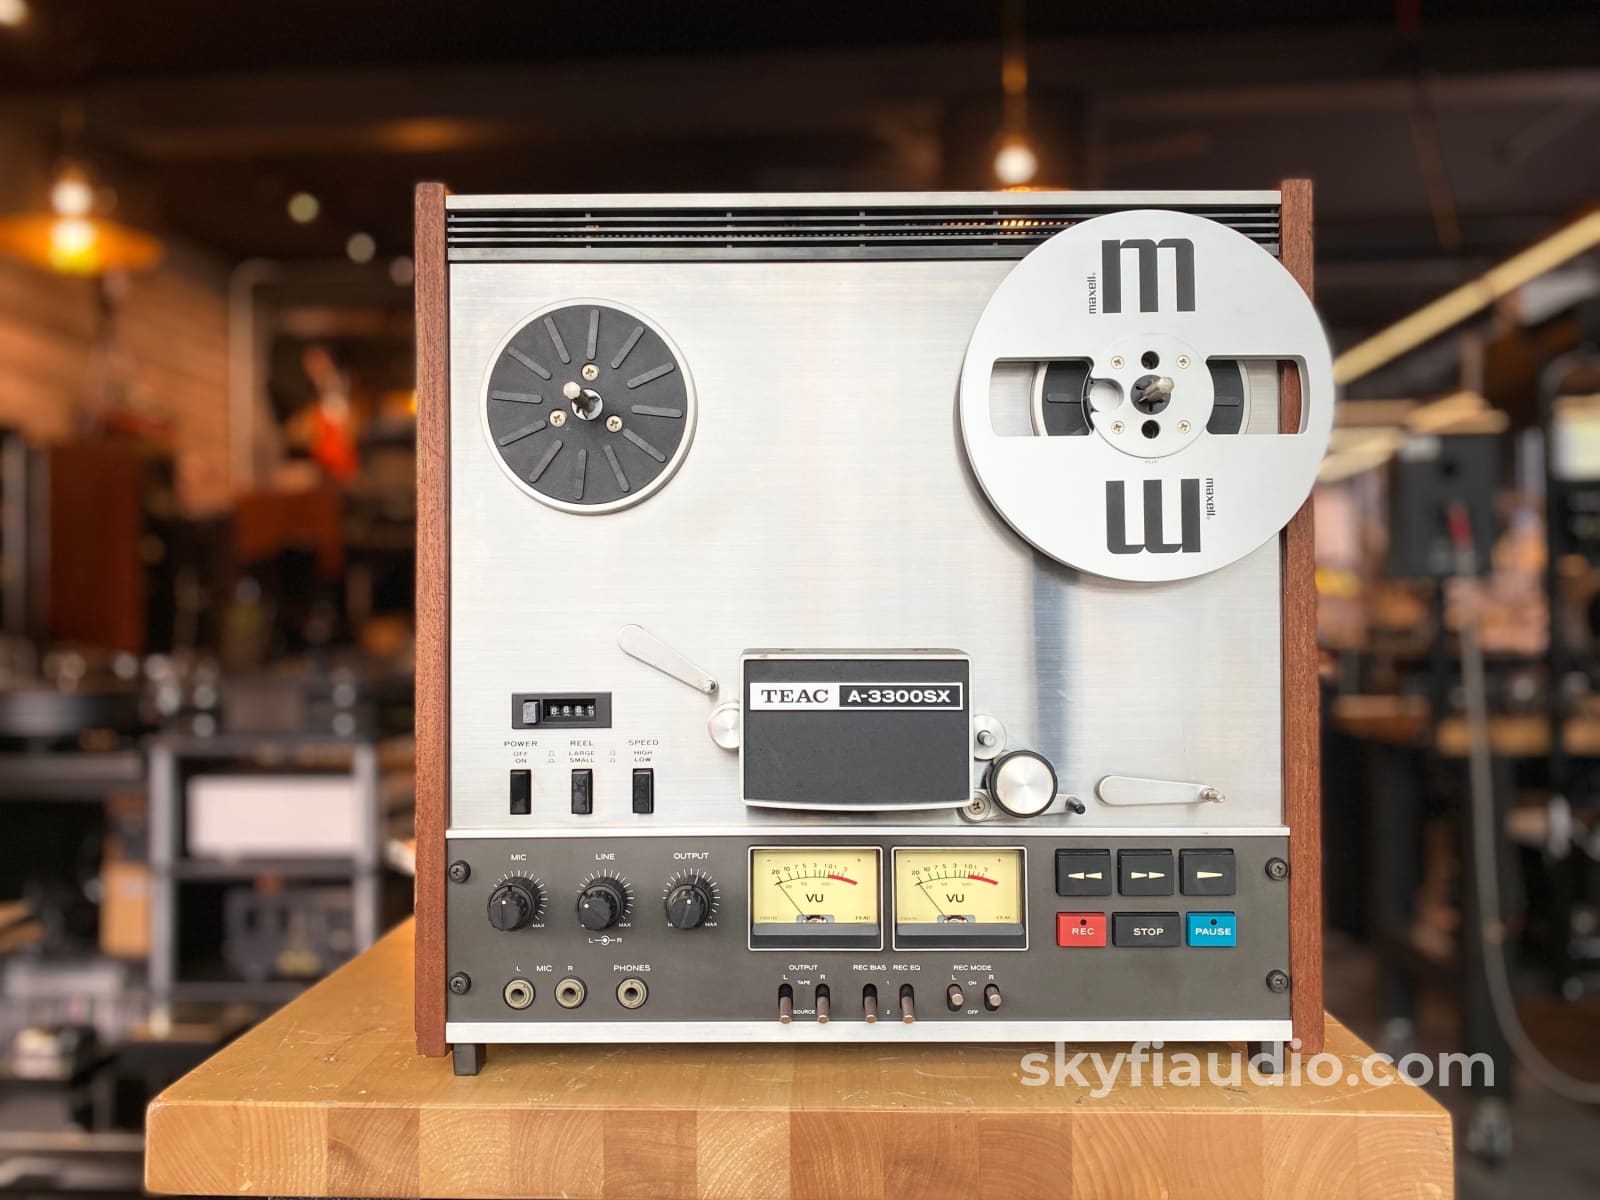 TEAC A-3300SX Reel to Reel Tape Deck